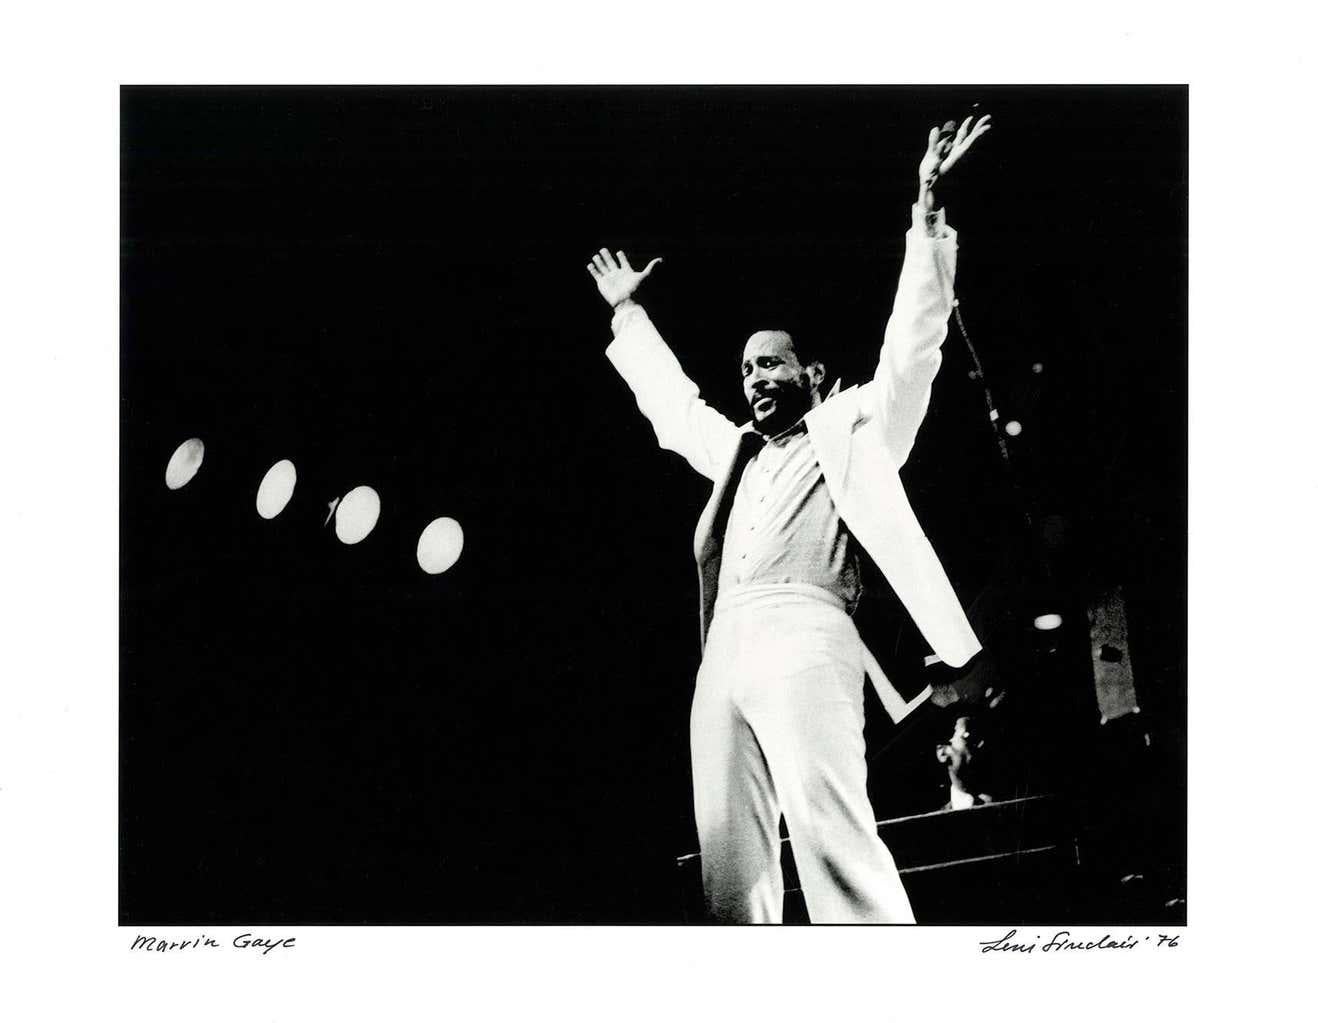 Marvin Gaye Detroit 1976 by Leni Sinclair: 
Marvin Gaye photograph, Detroit, 1976, by the legendary & historic Detroit photographer Leni Sinclair; 2016's Kresge Foundation's Eminent Artist of 2016 (See The Guardian UK Photo Section, Jan. 28, 2016).